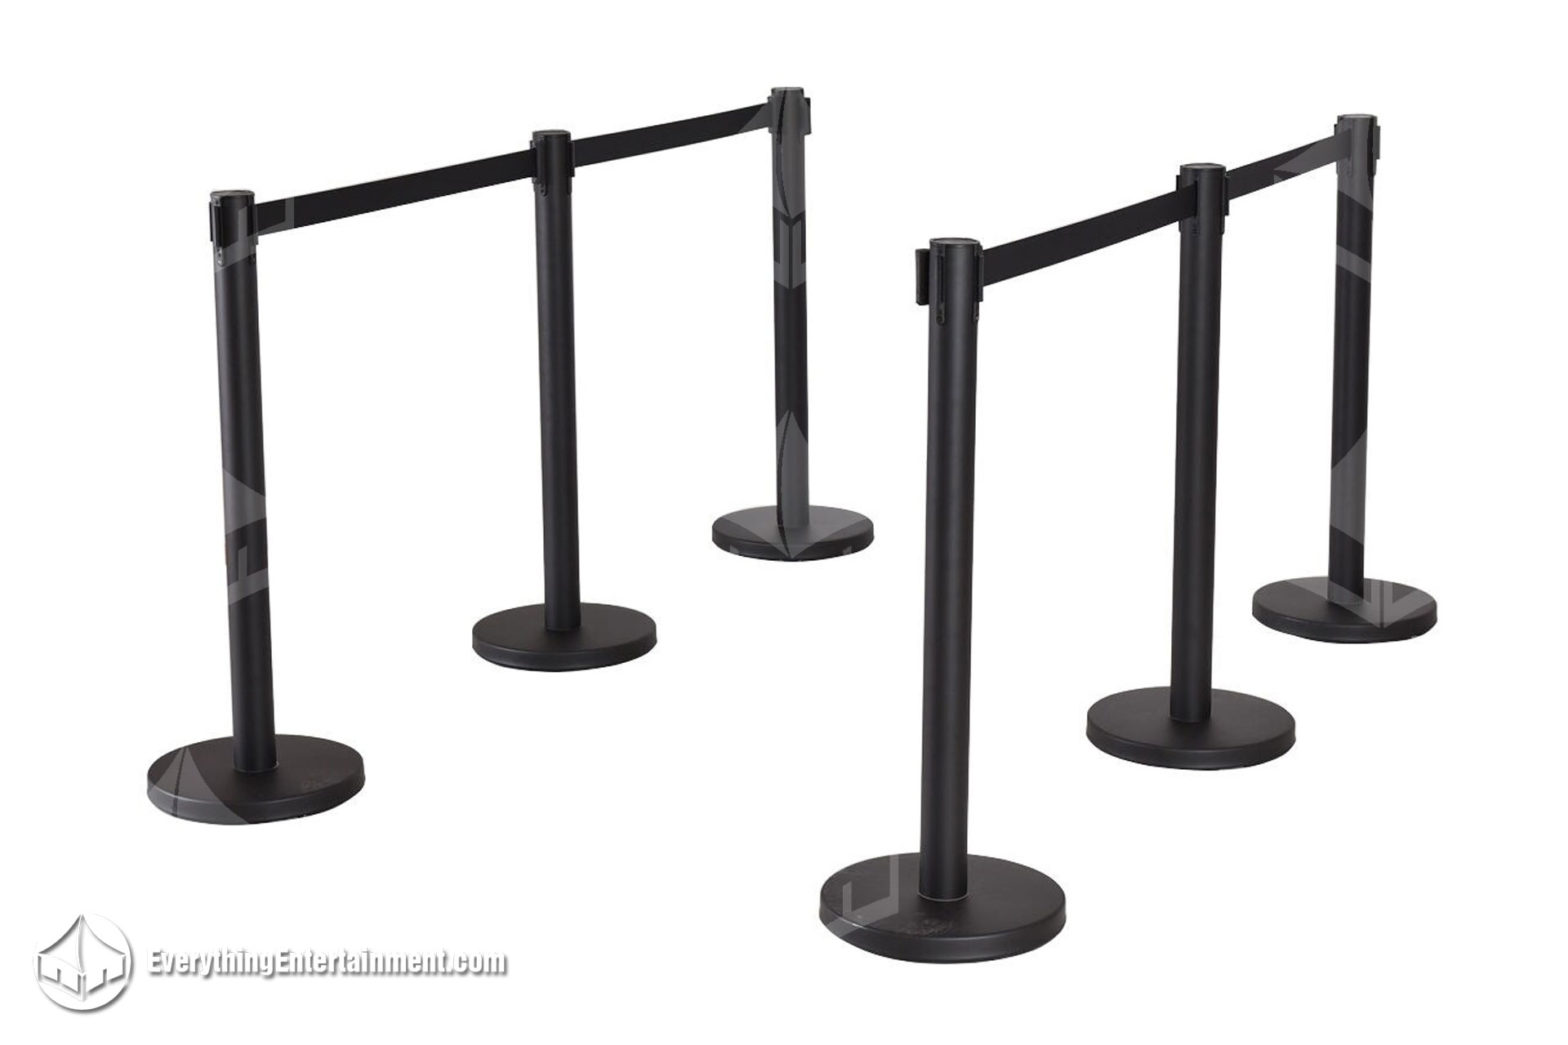 six black retractable belt stanchions on a white background